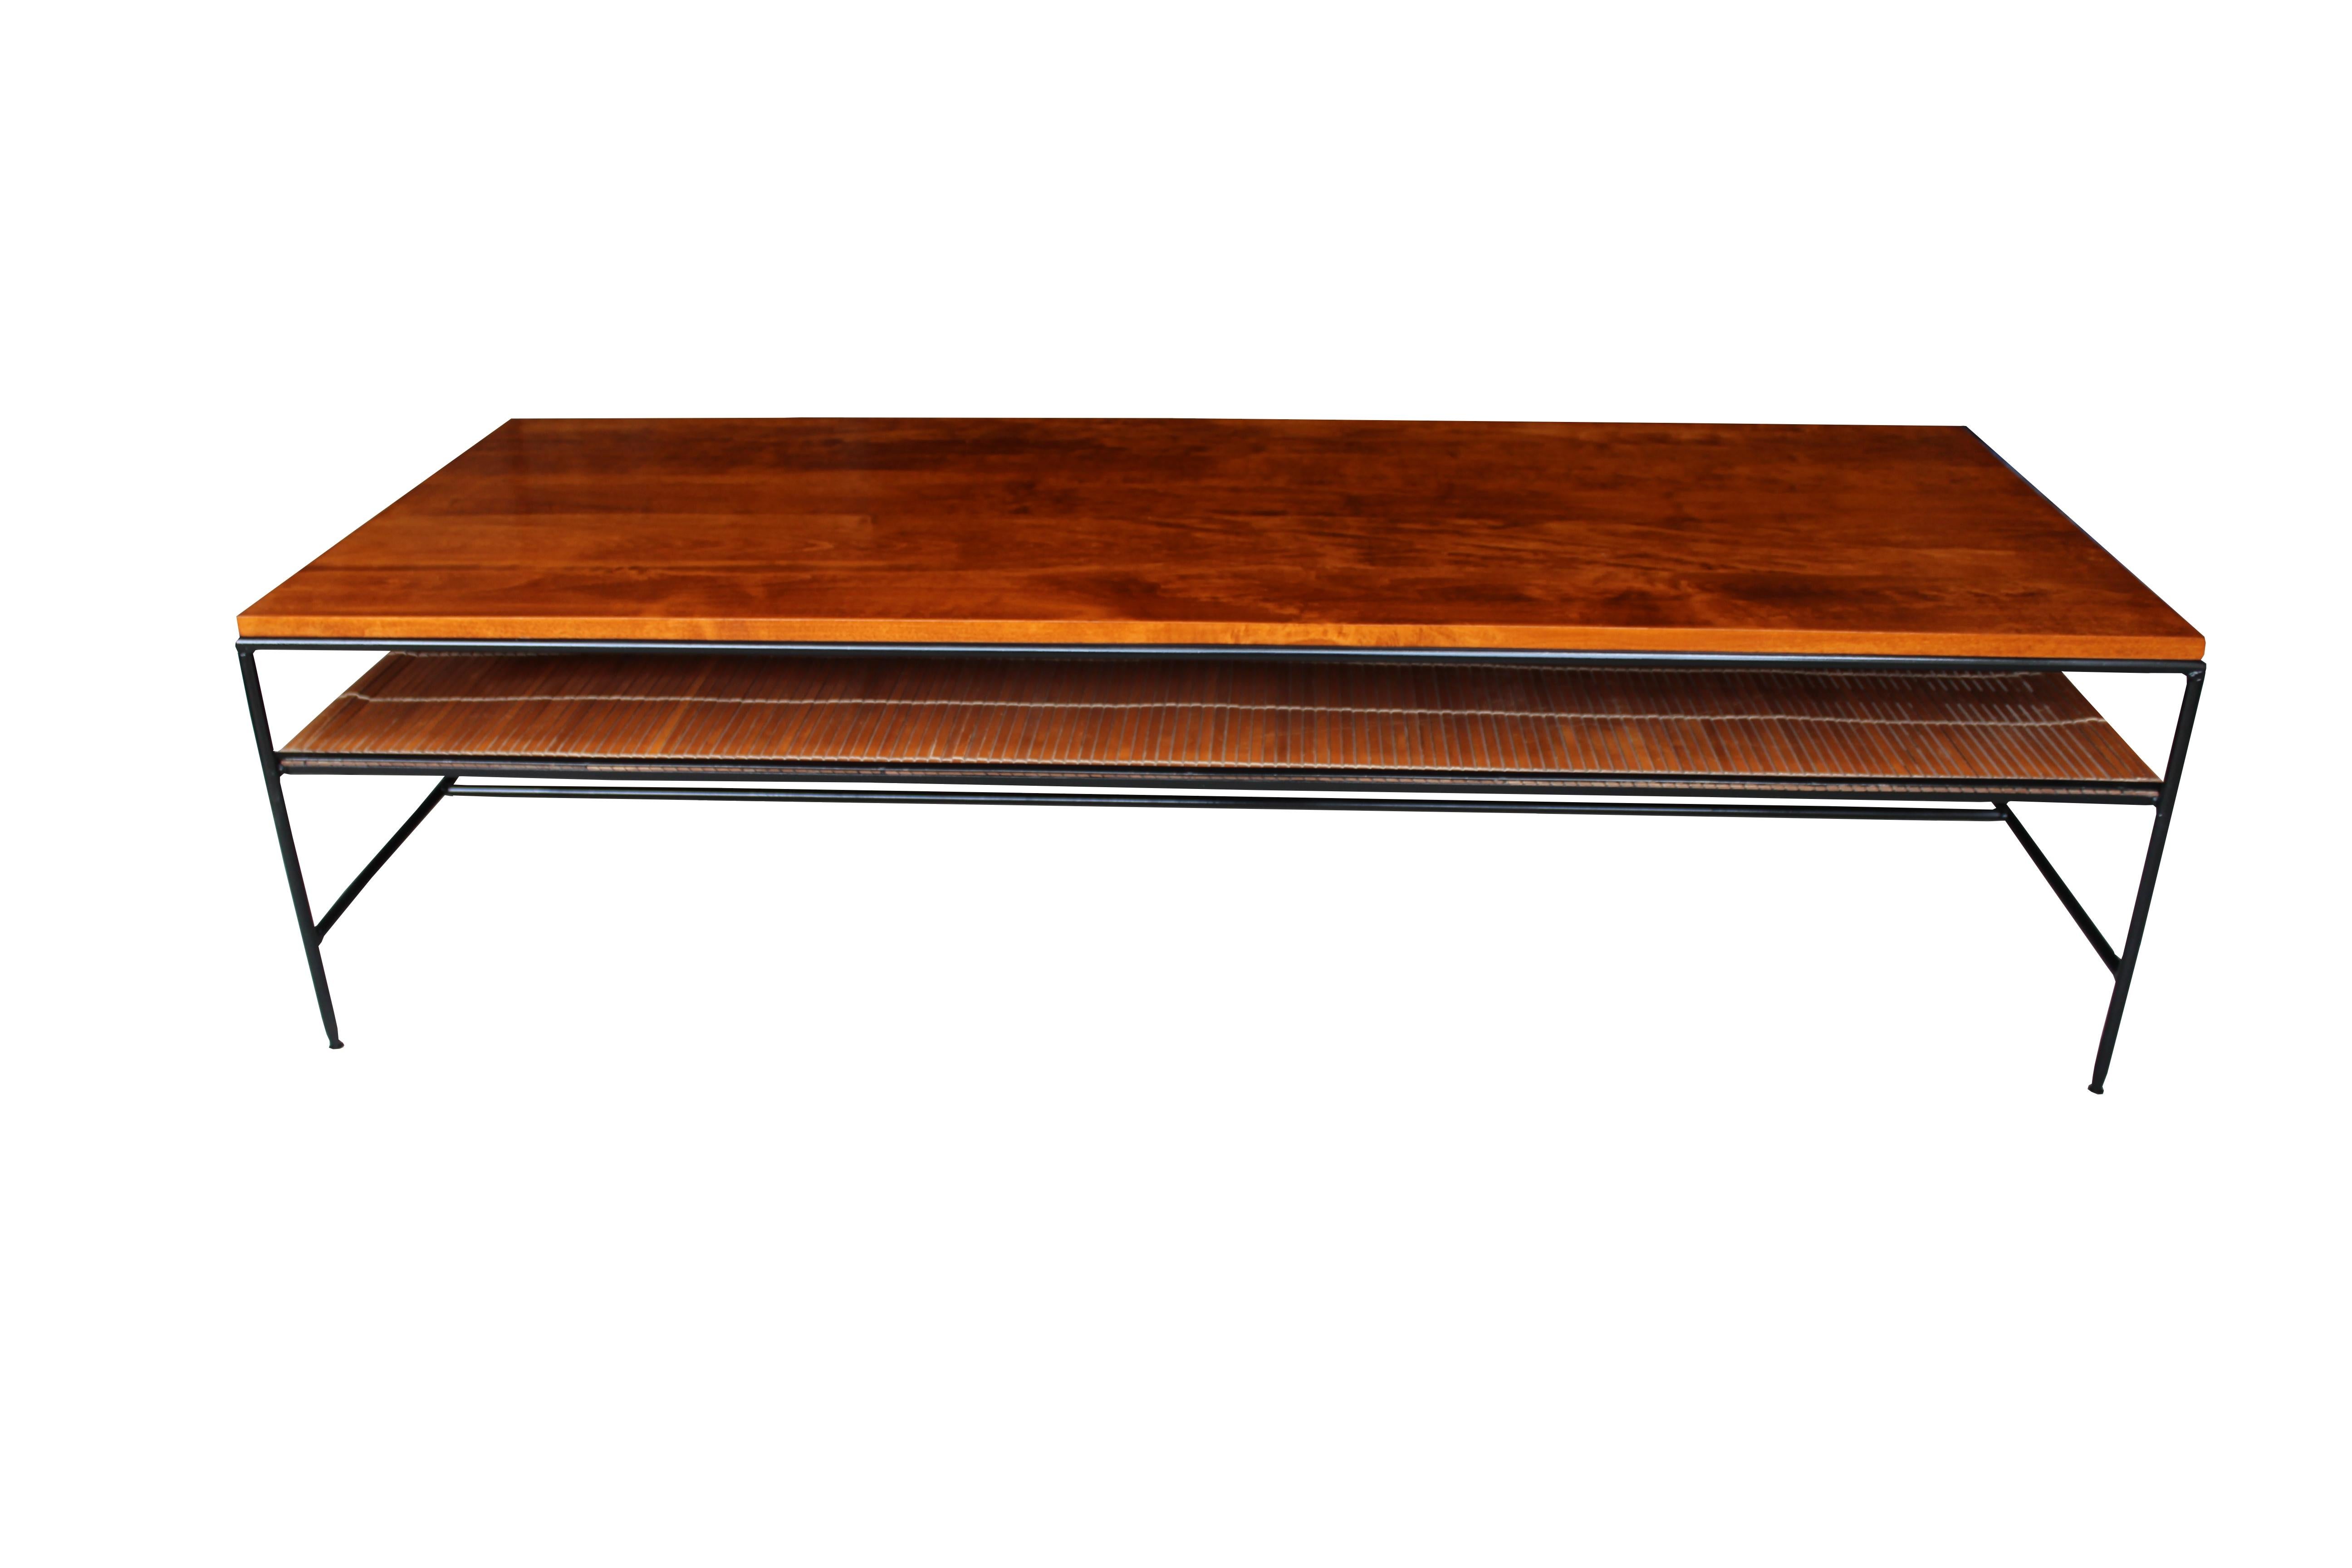 20th Century Mid-Century Modern Maple Coffee Table by Paul McCobb for Planner For Sale